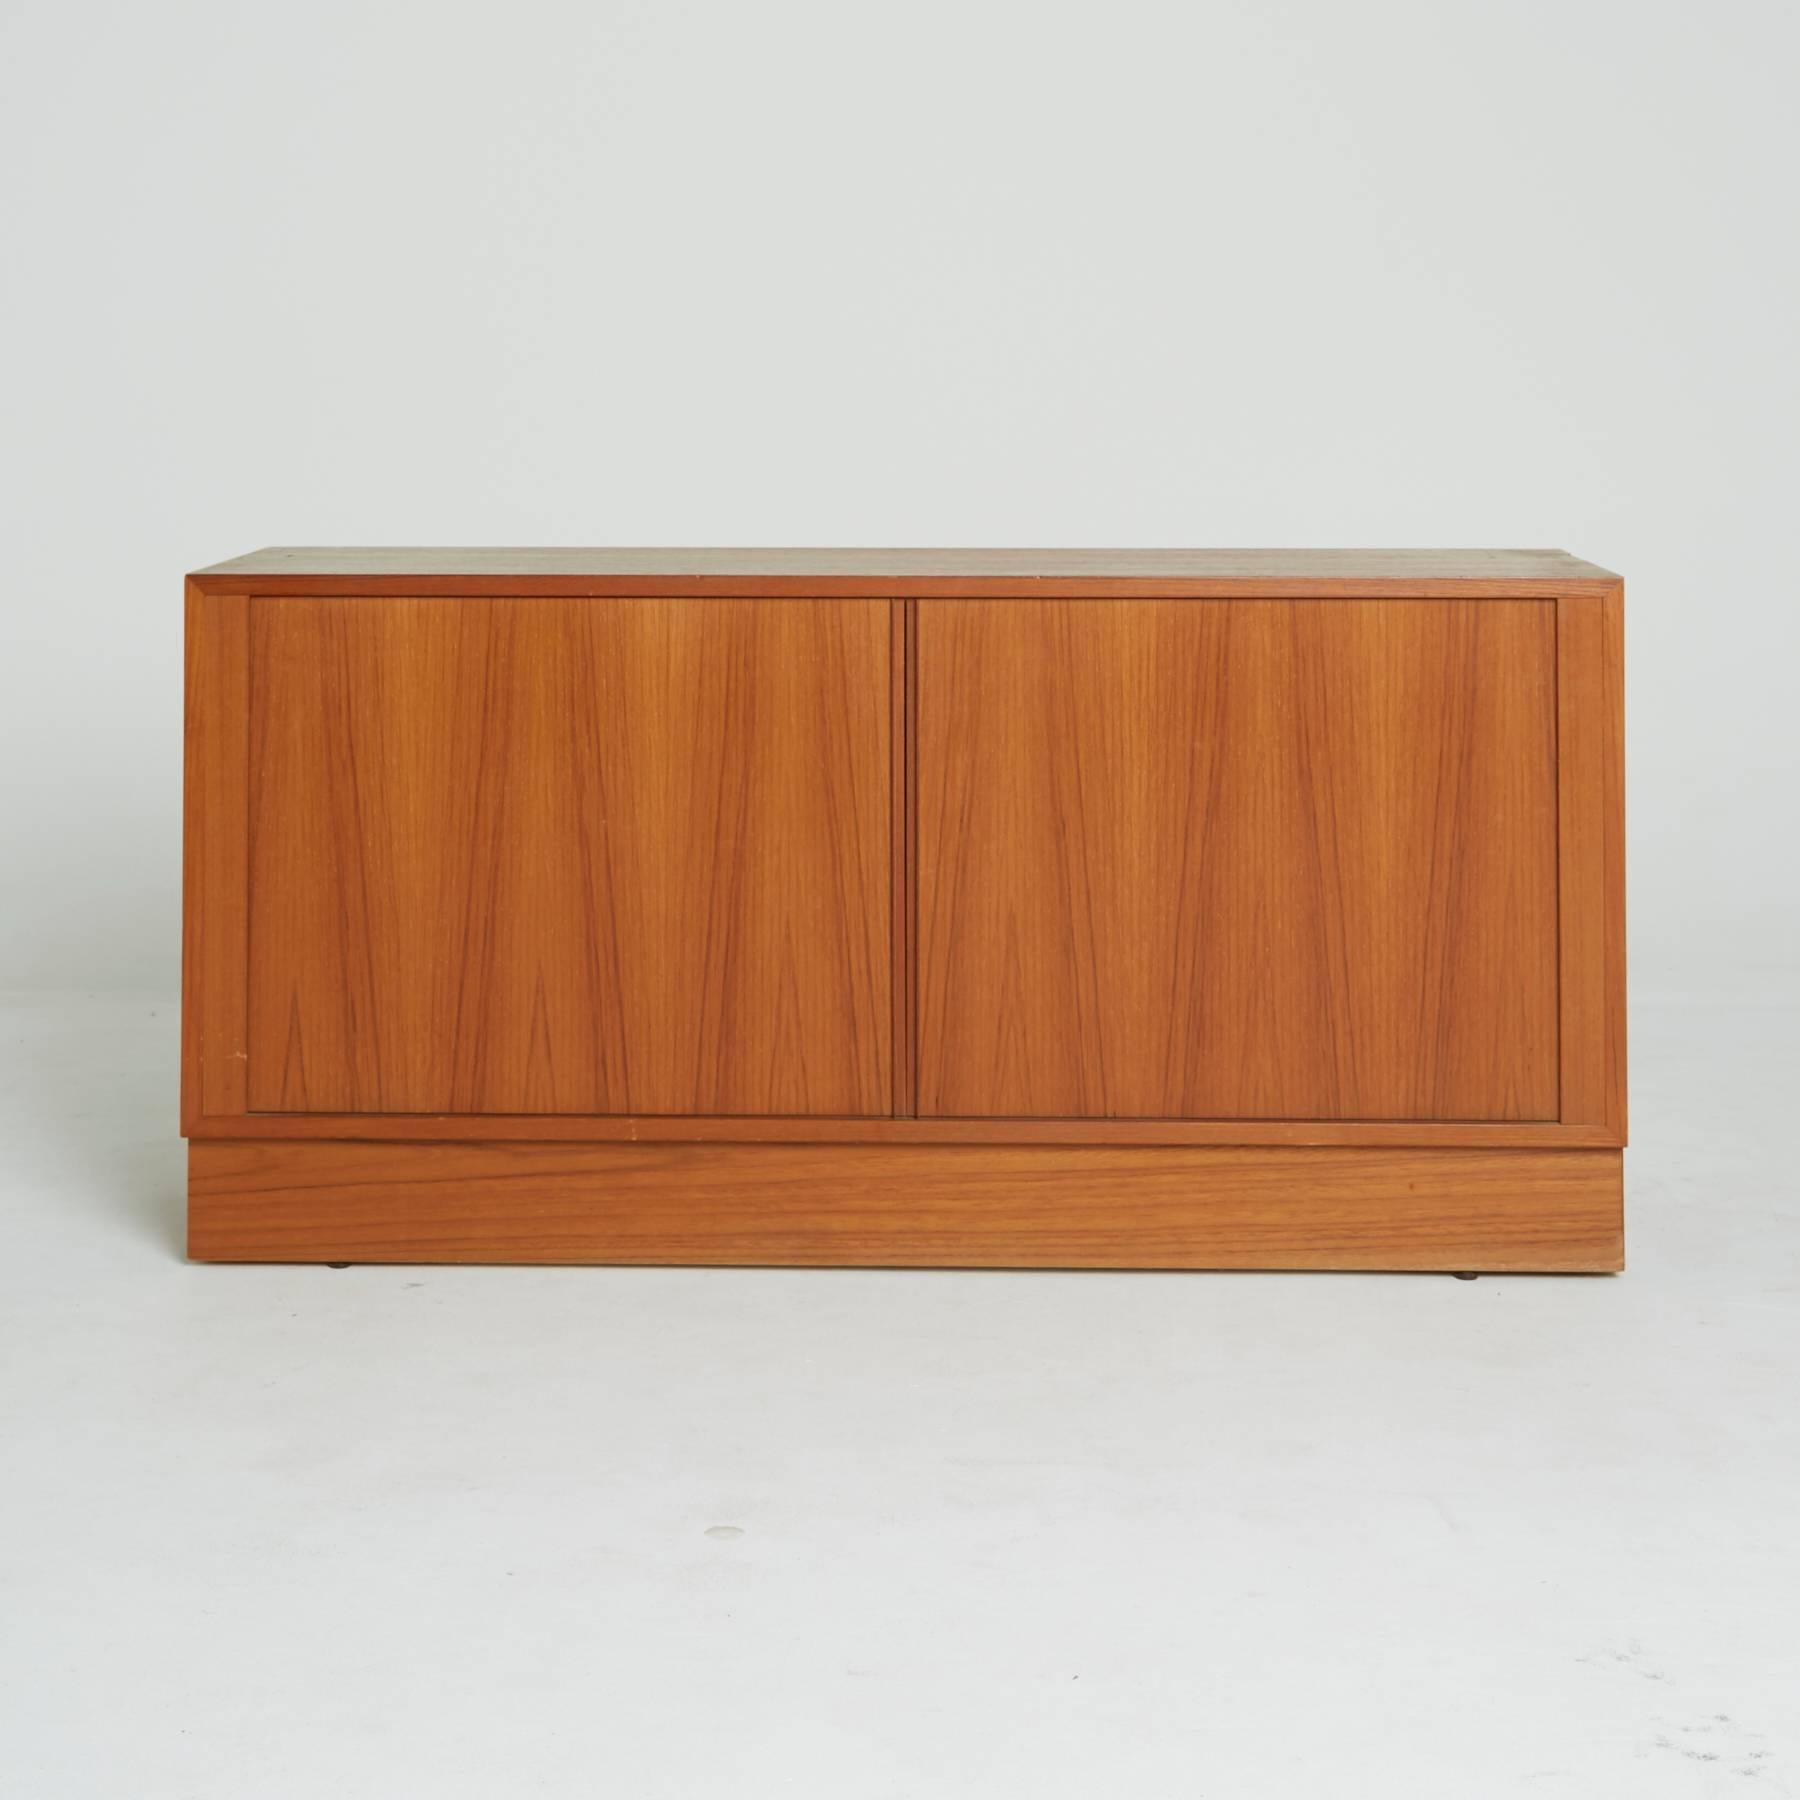 Compact in size, this perfect Danish modern sideboard is dynamic in its use, fitting perfectly where other other credenzas may overpower. Its beautiful teak construction displays an elongated zig zag pattern in the wood grain. The tambour doors